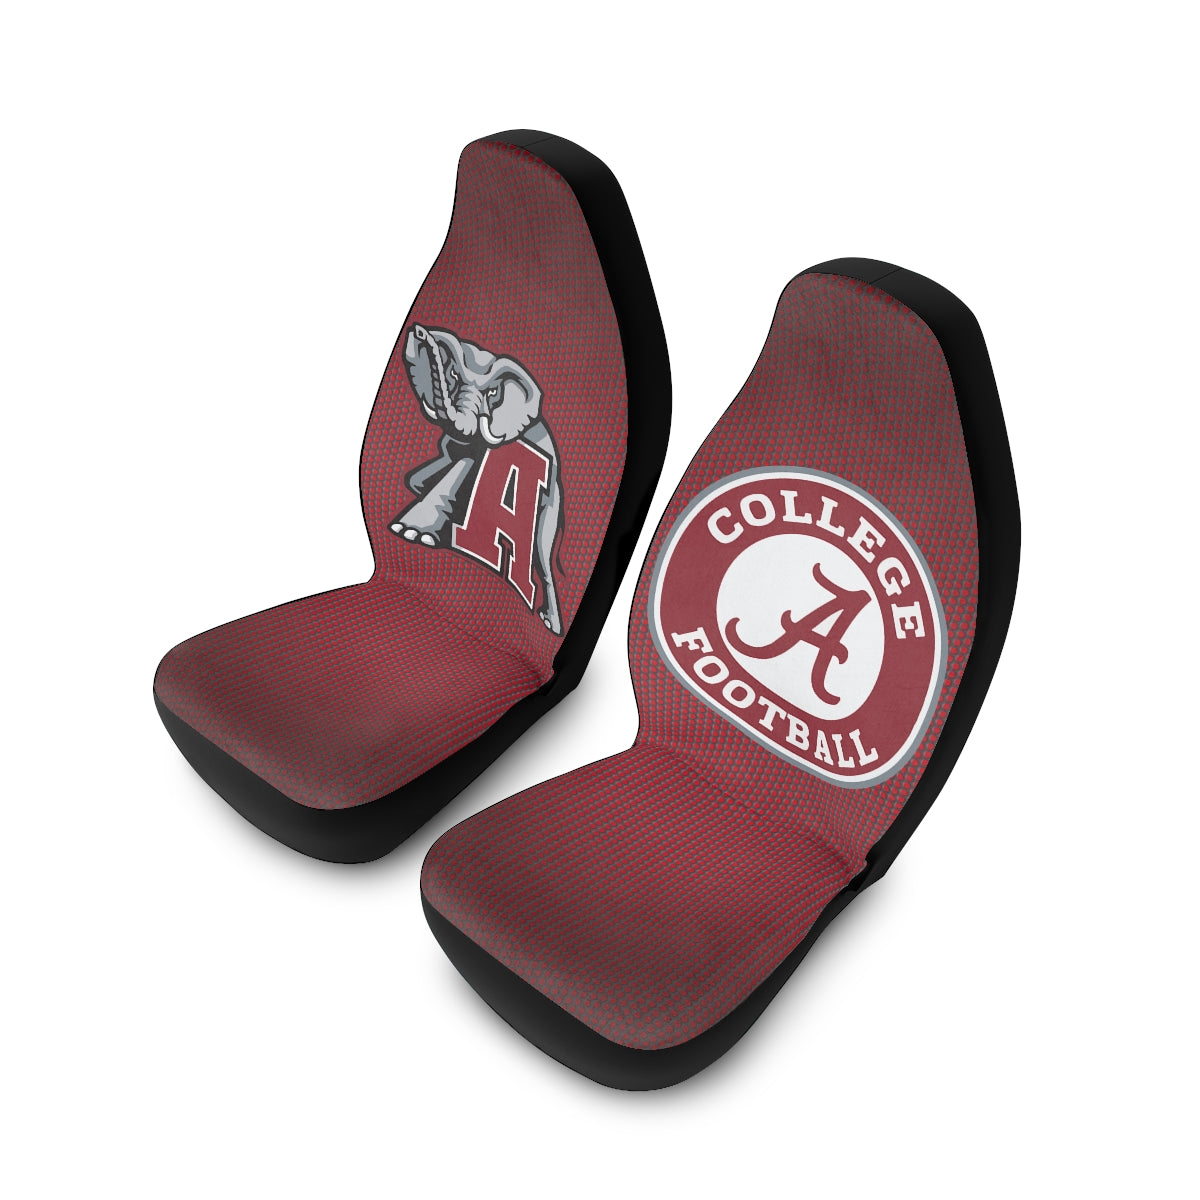 Alabama Car Seat Covers: Show your team pride on the road! Stylish, durable protection for your car seats. Roll with Crimson Tide spirit! 🏈🚗